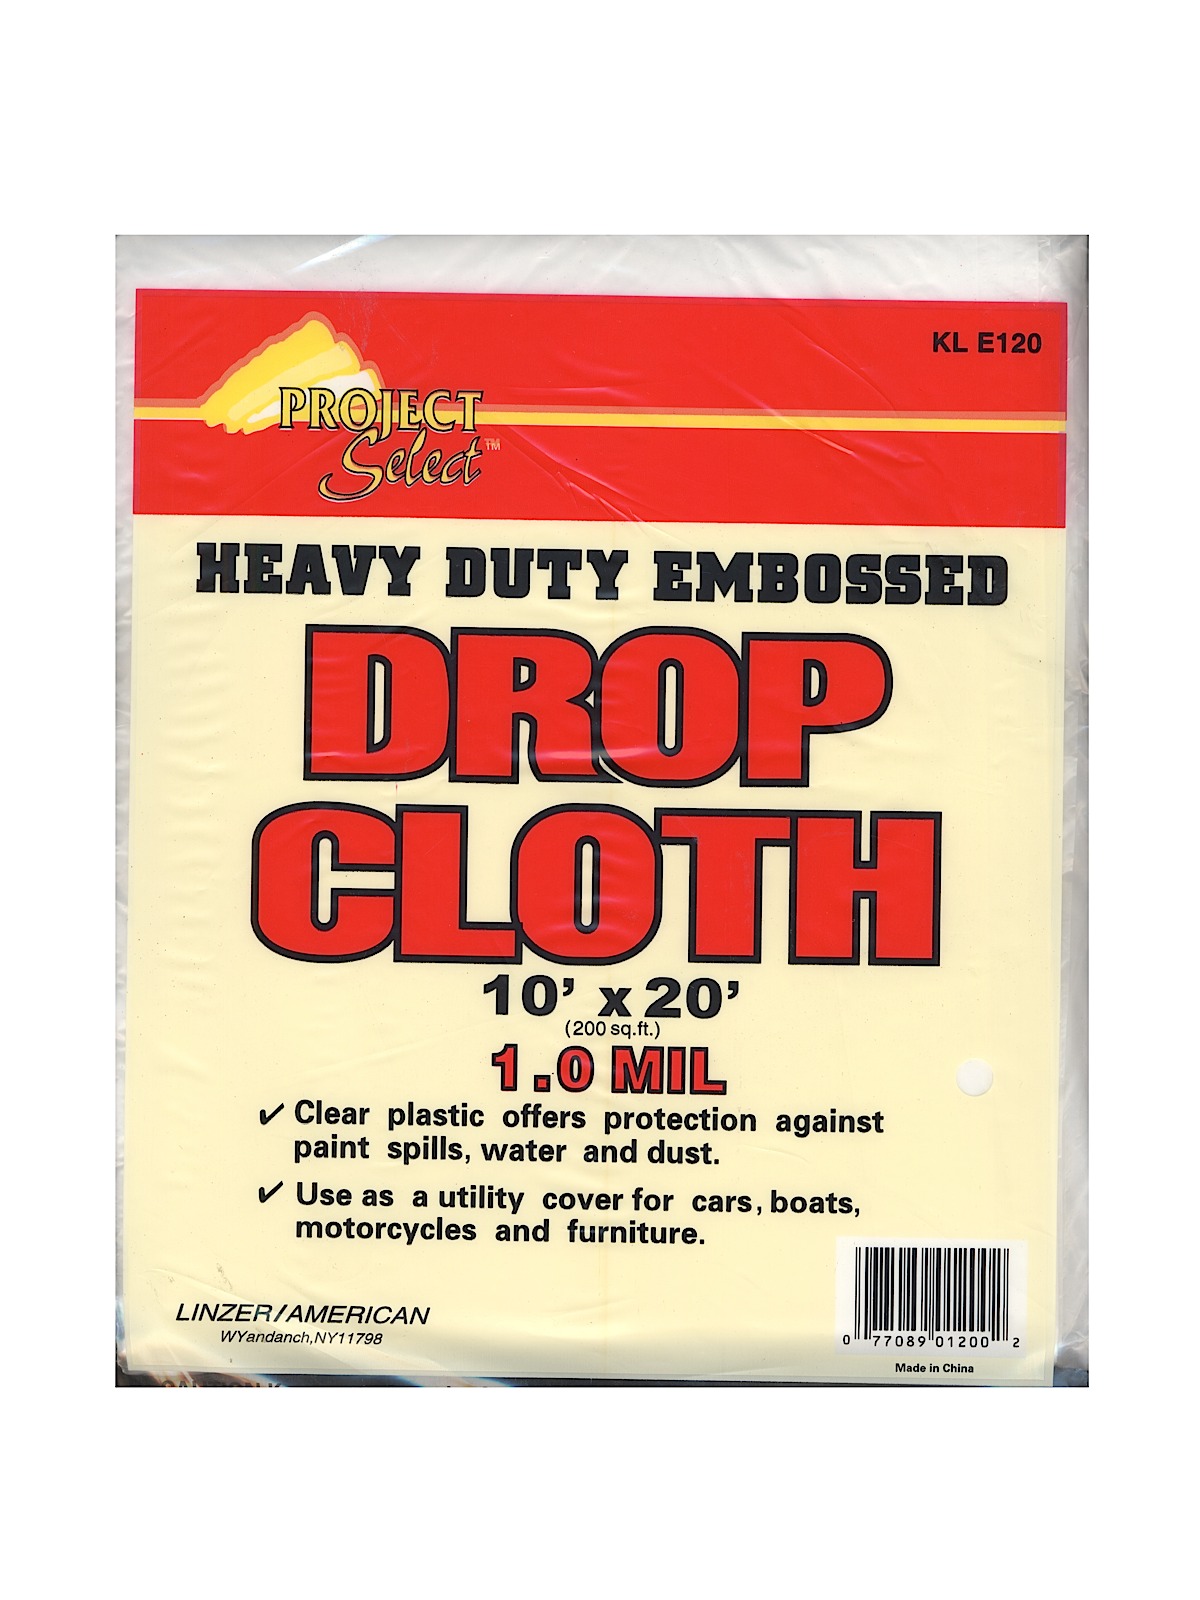 Heavy Duty Embossed Drop Cloth 1 Mm Thick 10 Ft. X 20 Ft.